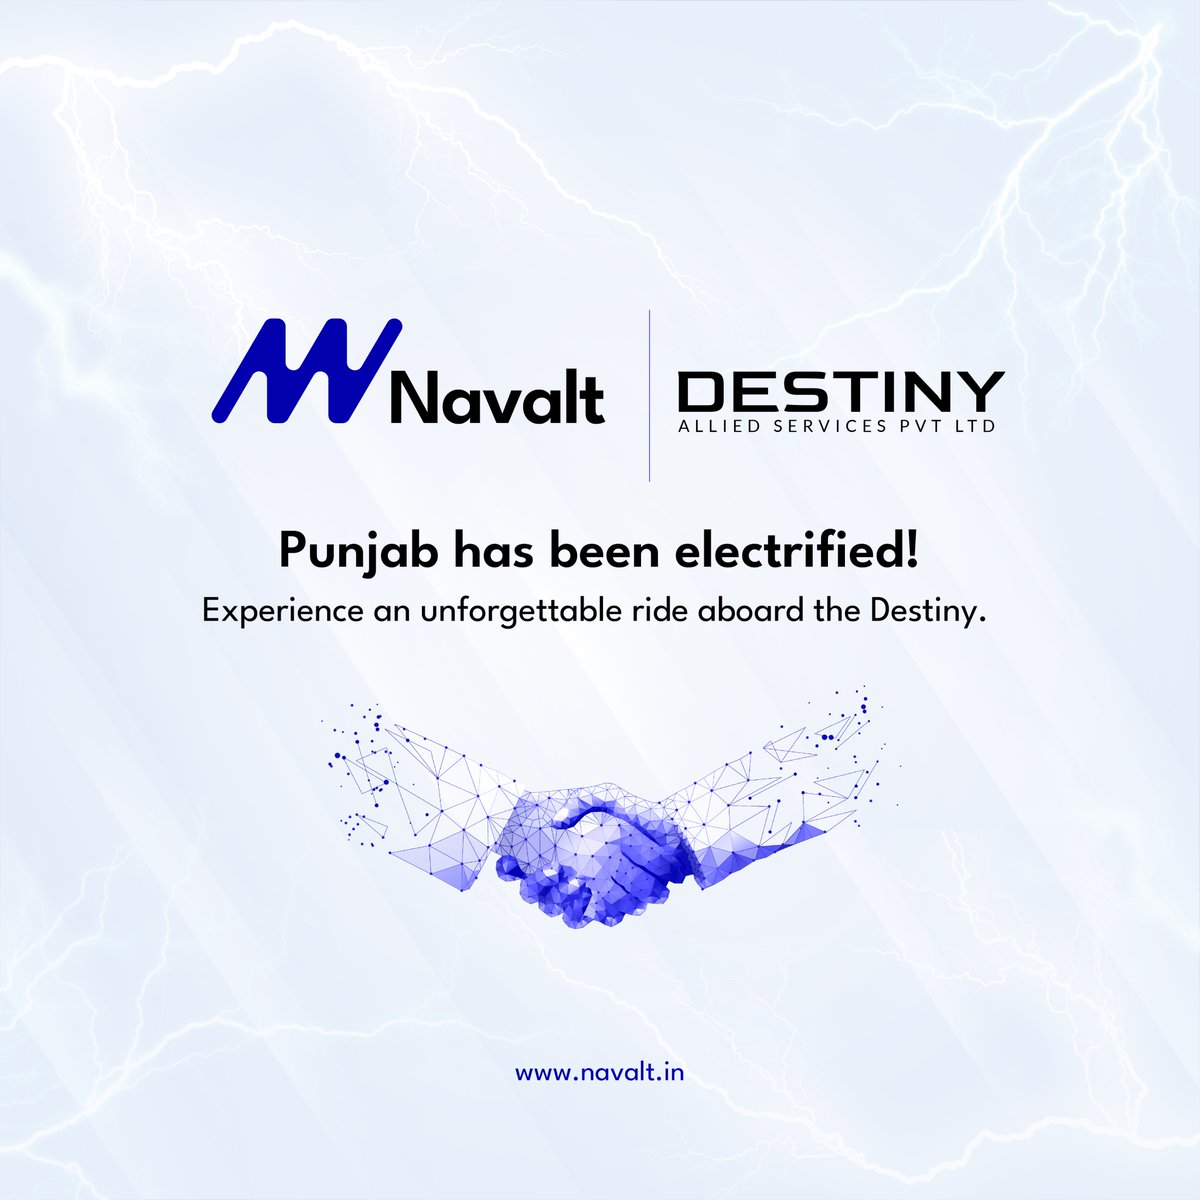 Sail into a sustainable future with Destiny, a revolutionary 30-passenger solar electric boat now electrifying the waterways of Punjab!

#electrification #navalt #solar #solarelectric #boat #solarelectricboat #punjab #waterways #electrify #sustainability #ecofriendly